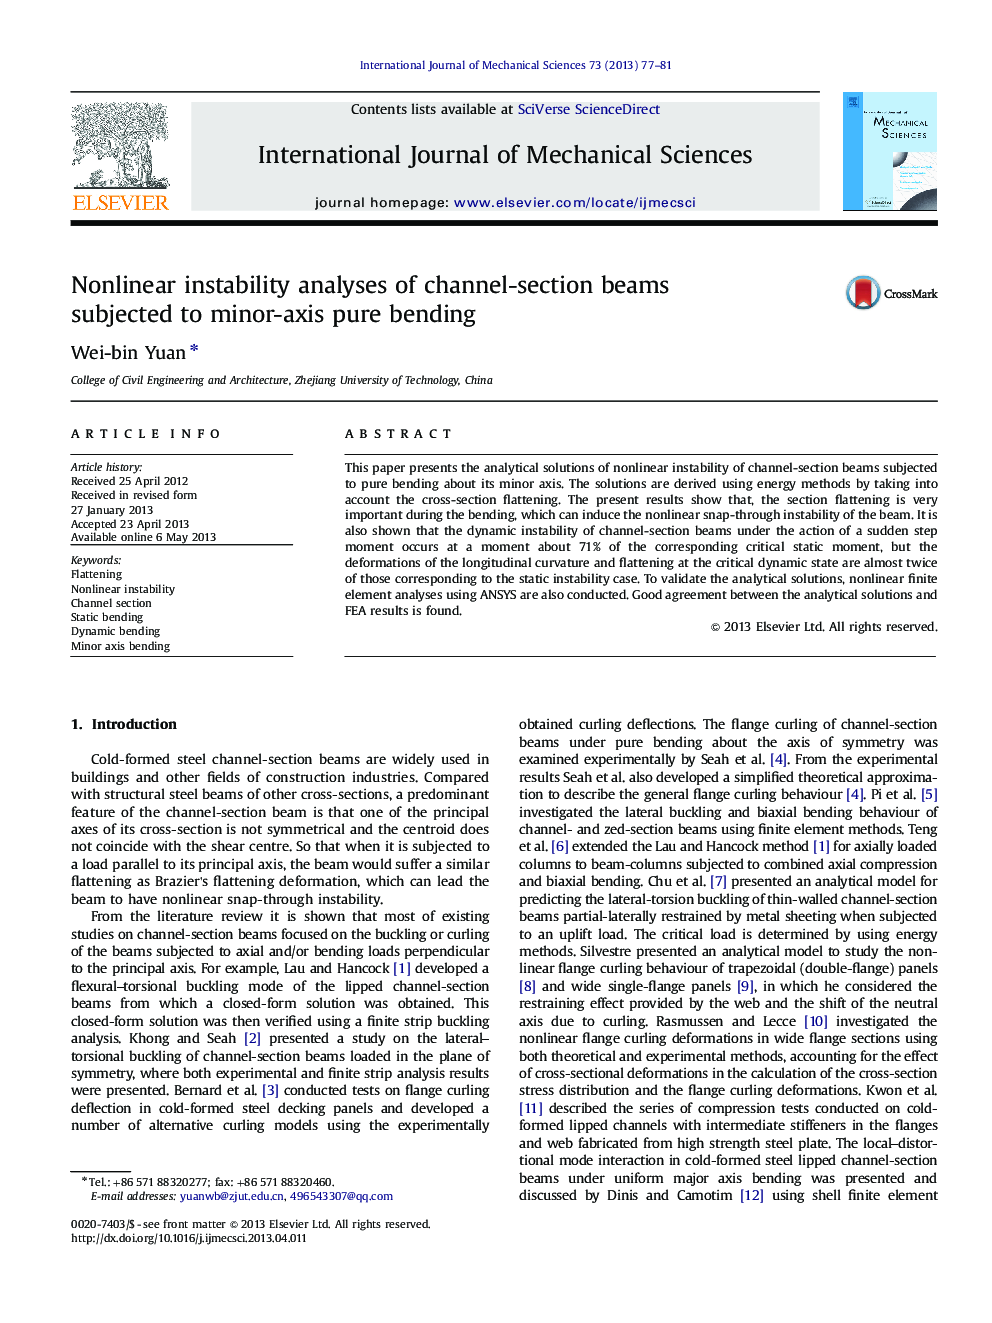 Nonlinear instability analyses of channel-section beams subjected to minor-axis pure bending